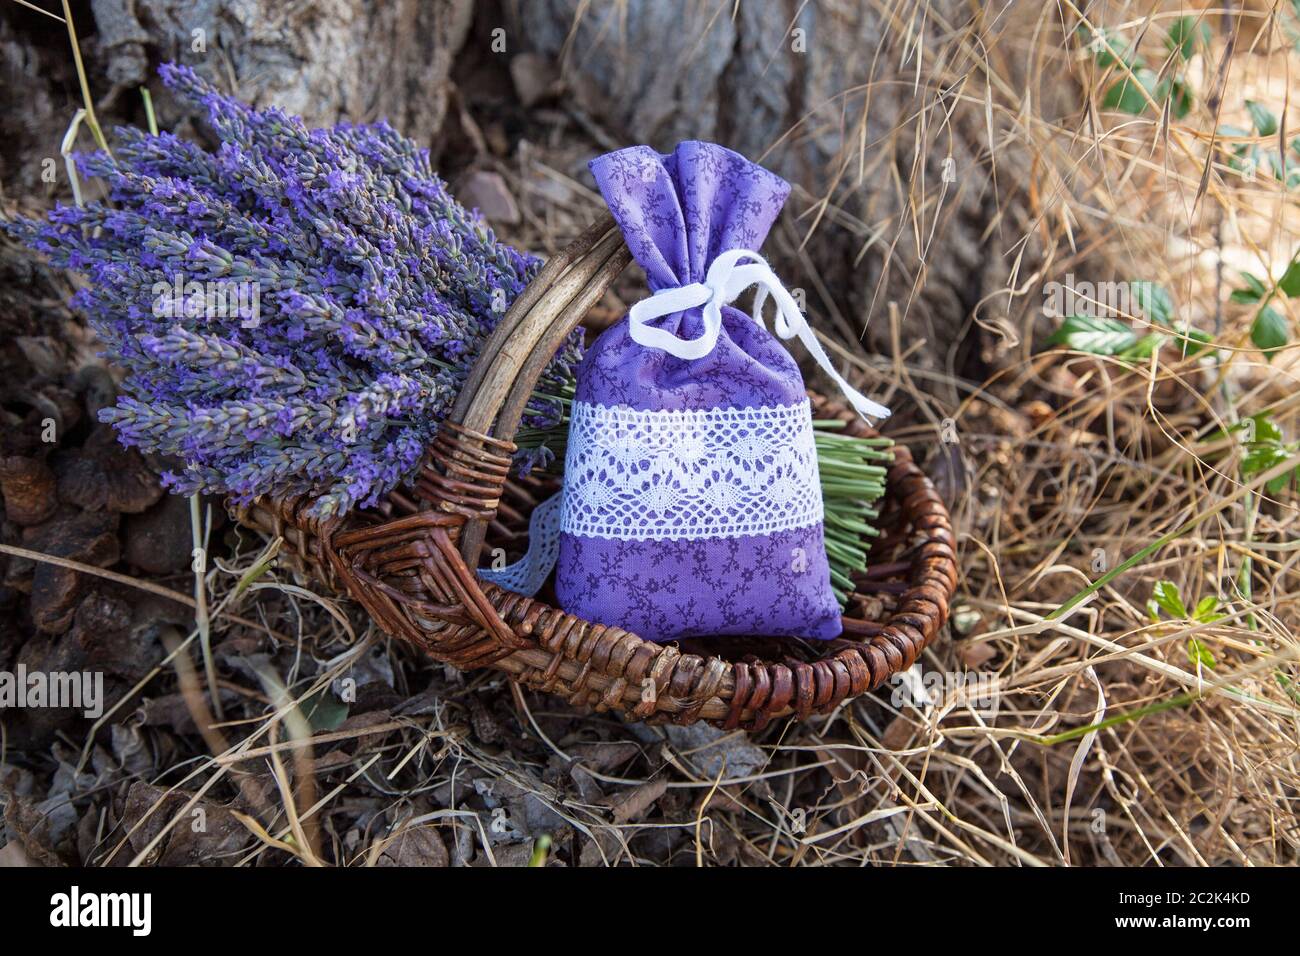 decorative bundle of lavender and bag with dry lavender flowers in rustic wicker basket in the south of France Stock Photo